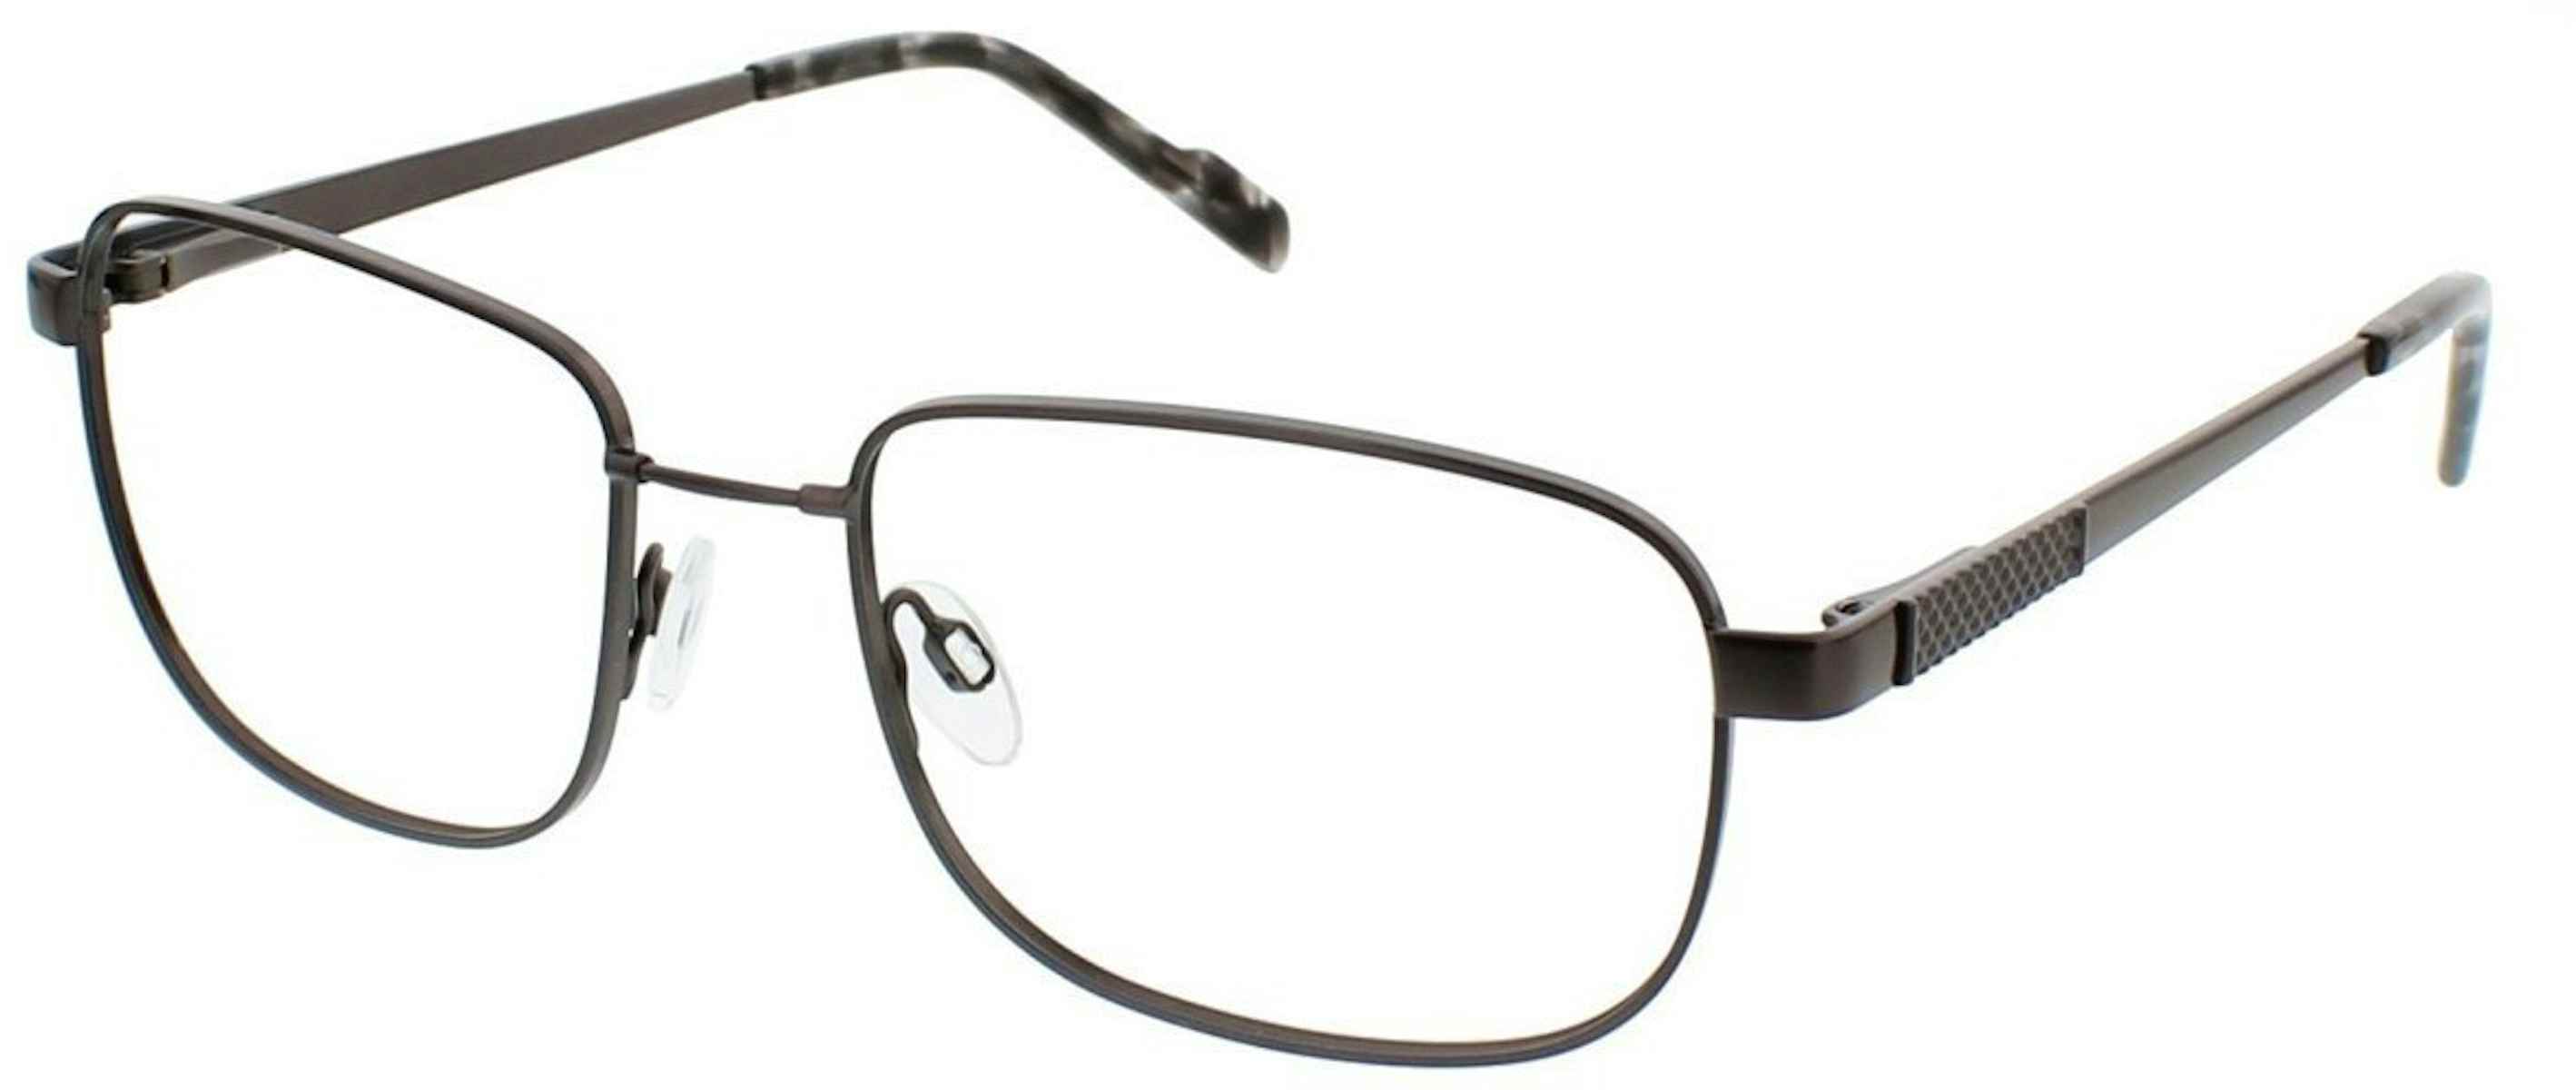 Shop Glasses Online Clear View Vision Care